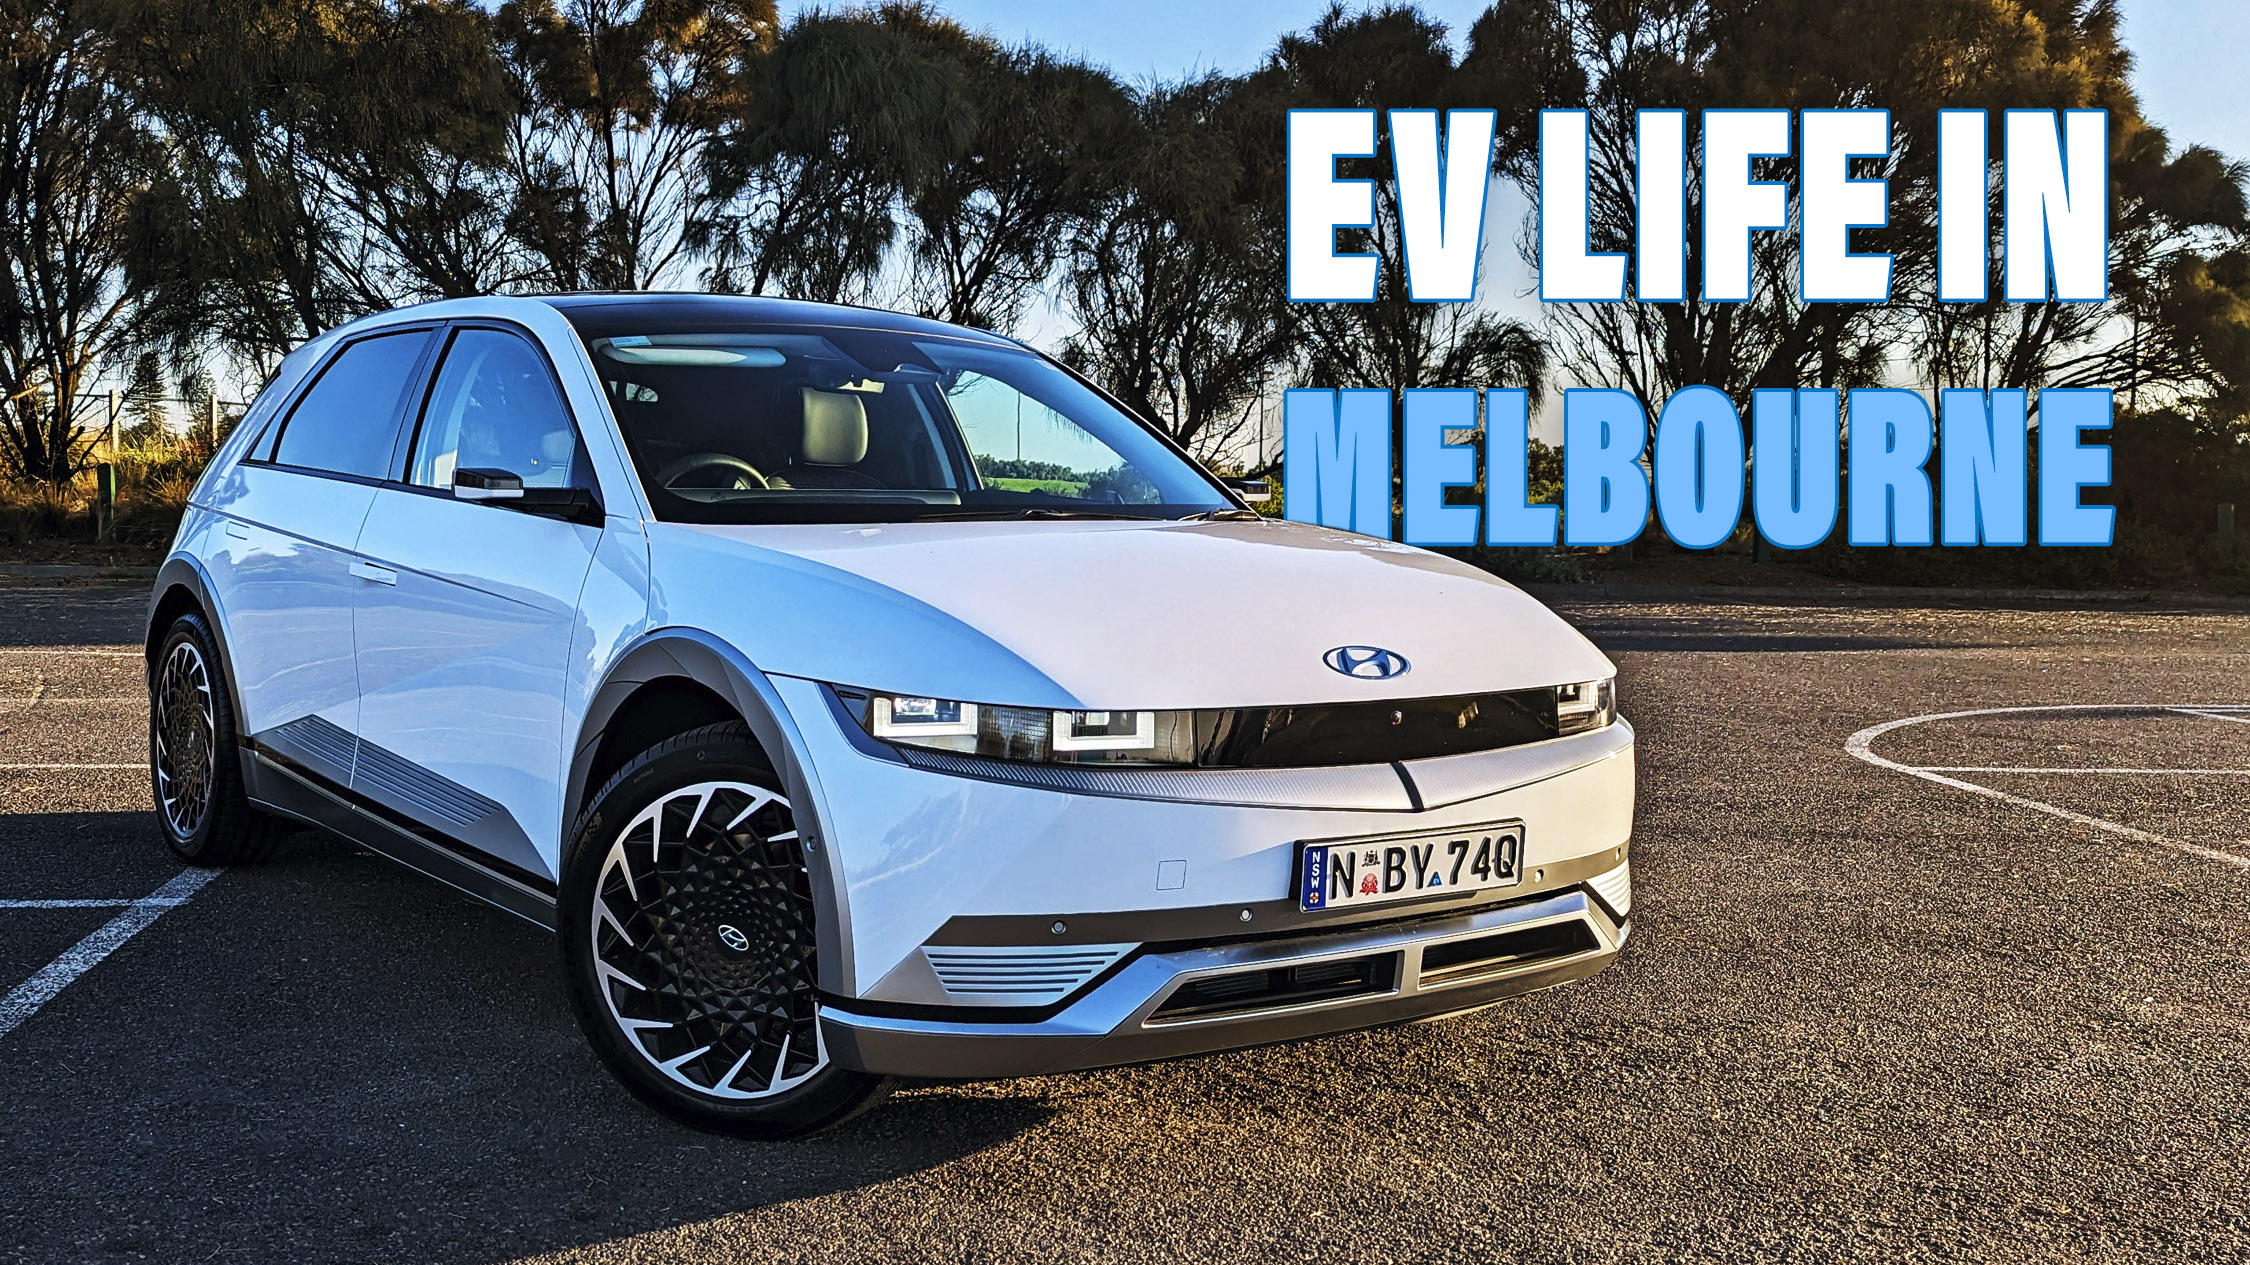 Can You Live With An EV In A City Like Melbourne Without A Home Charger? Auto Recent